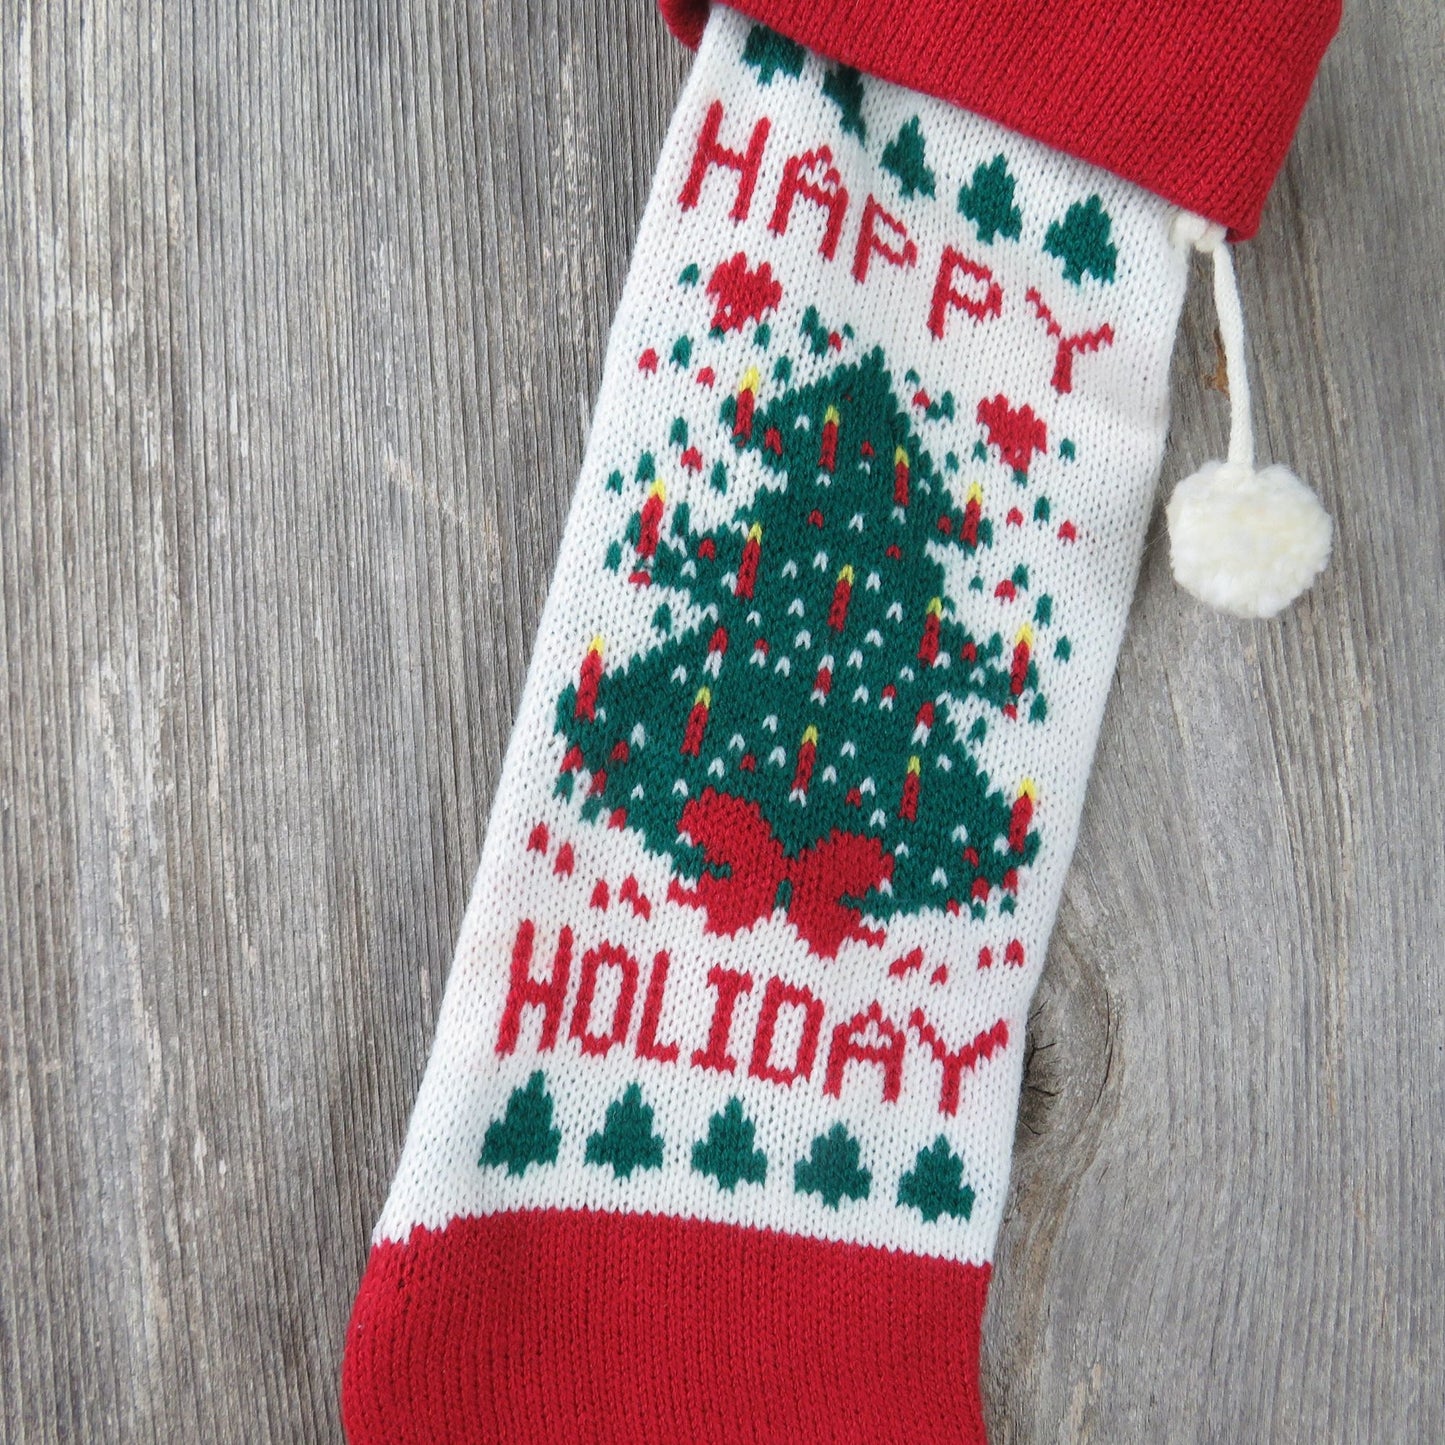 Vintage Knit Stocking Christmas Tree Happy Holidays Knitted Red White